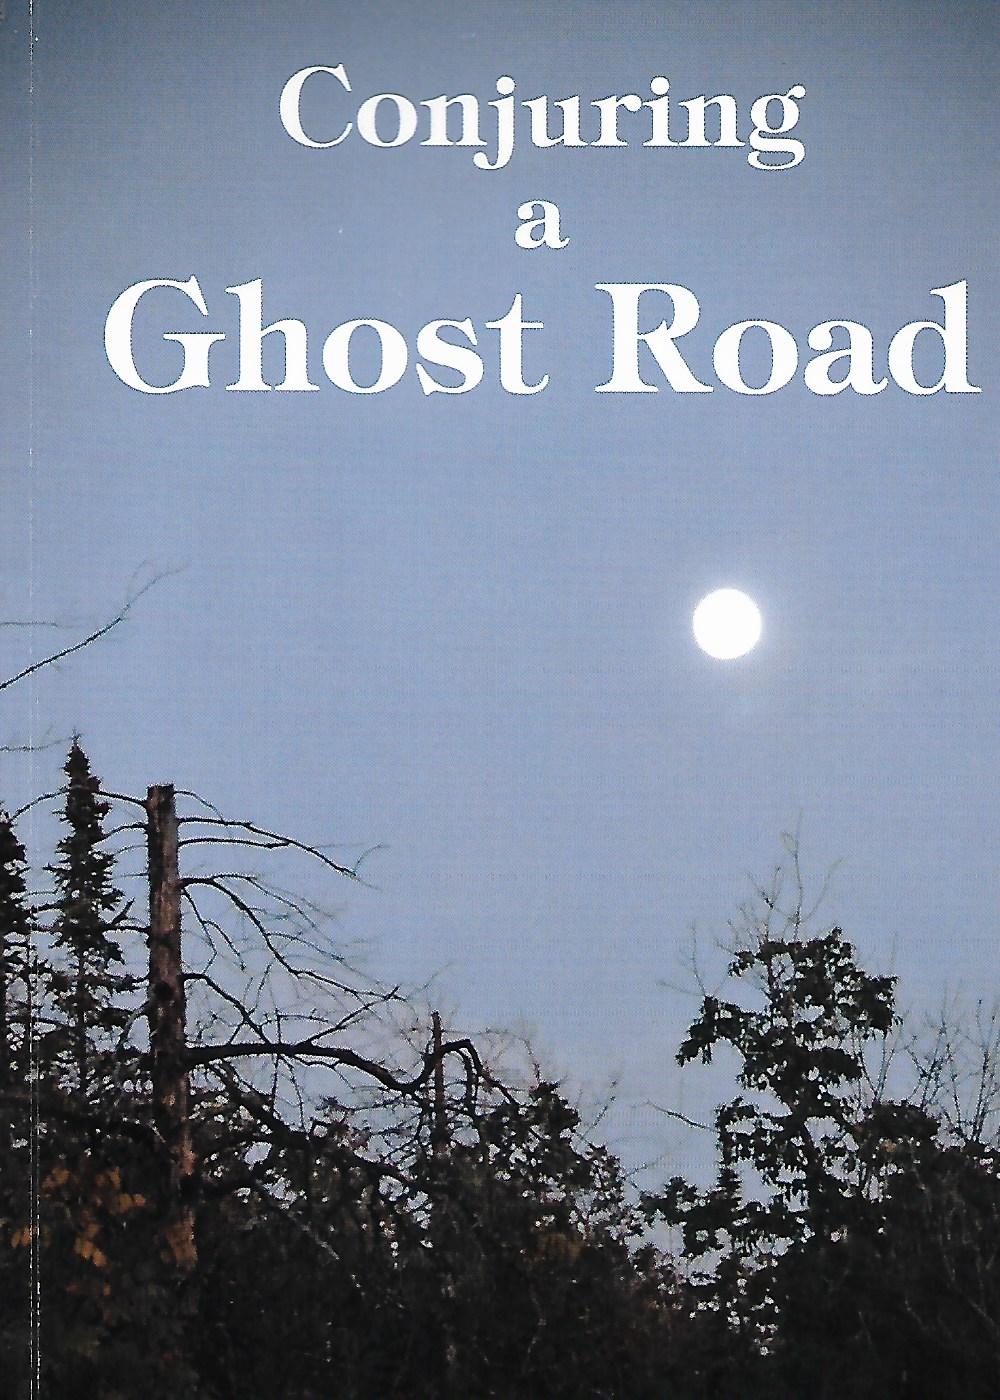 Conjuring a Ghost Road